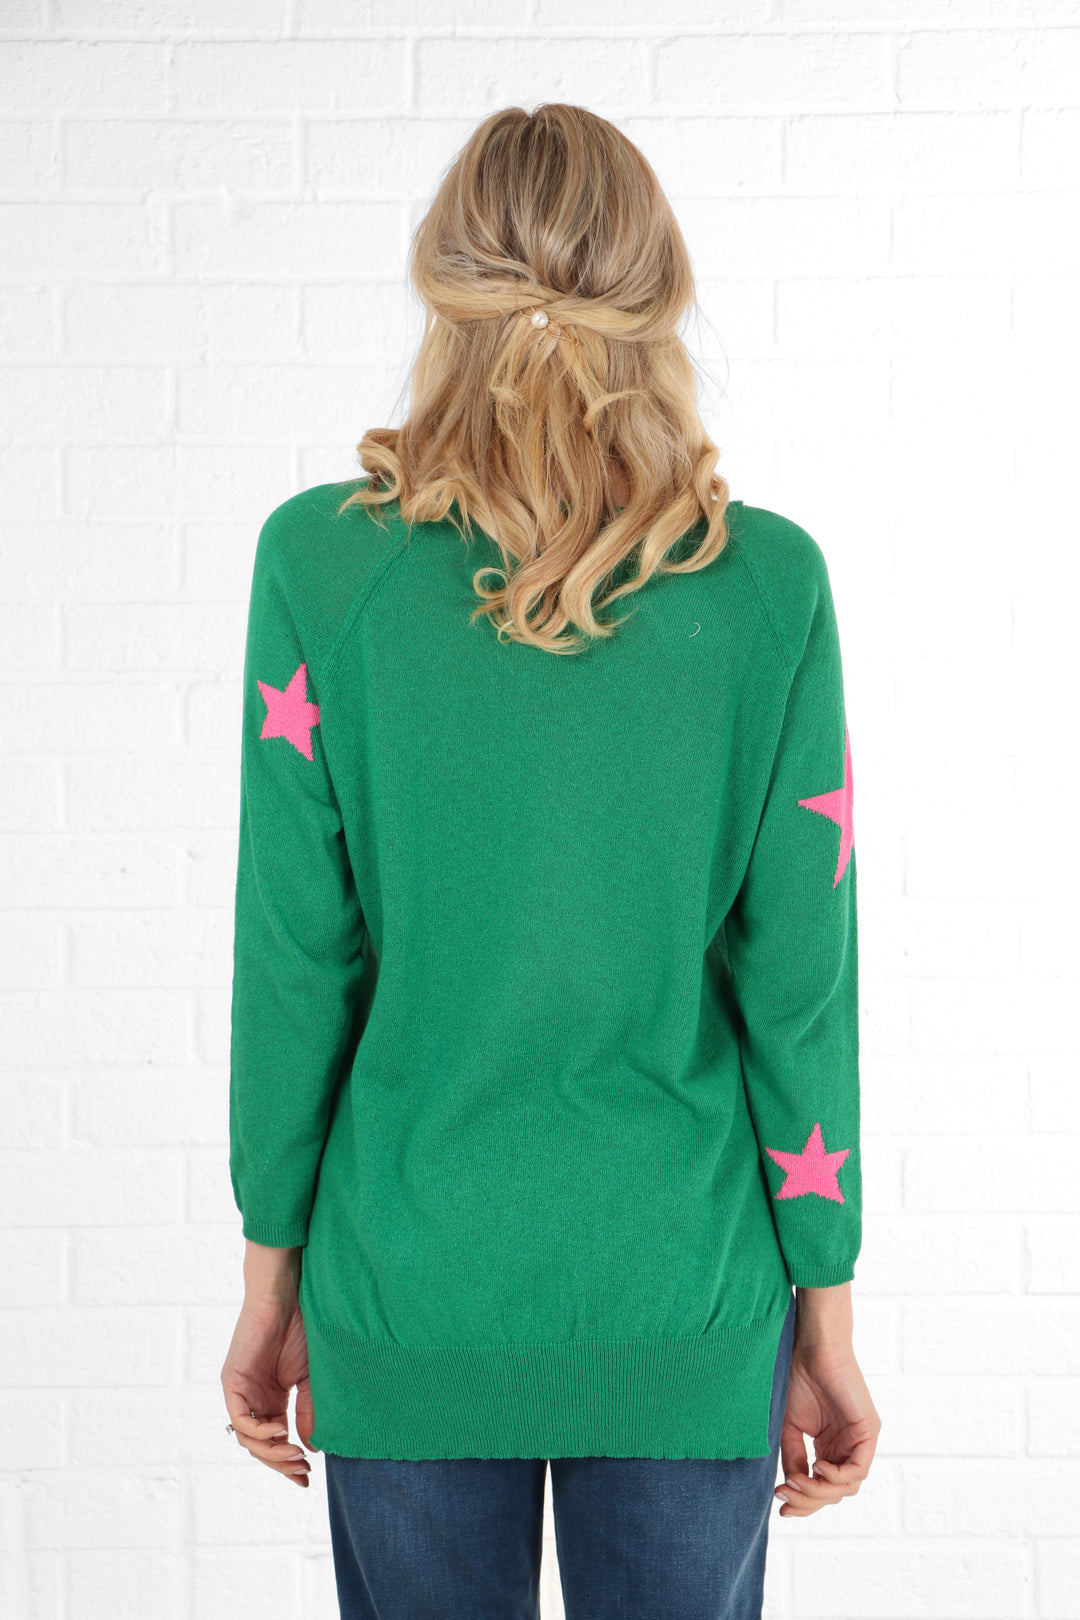 model showing the back of the jumper, showing that it is plain green